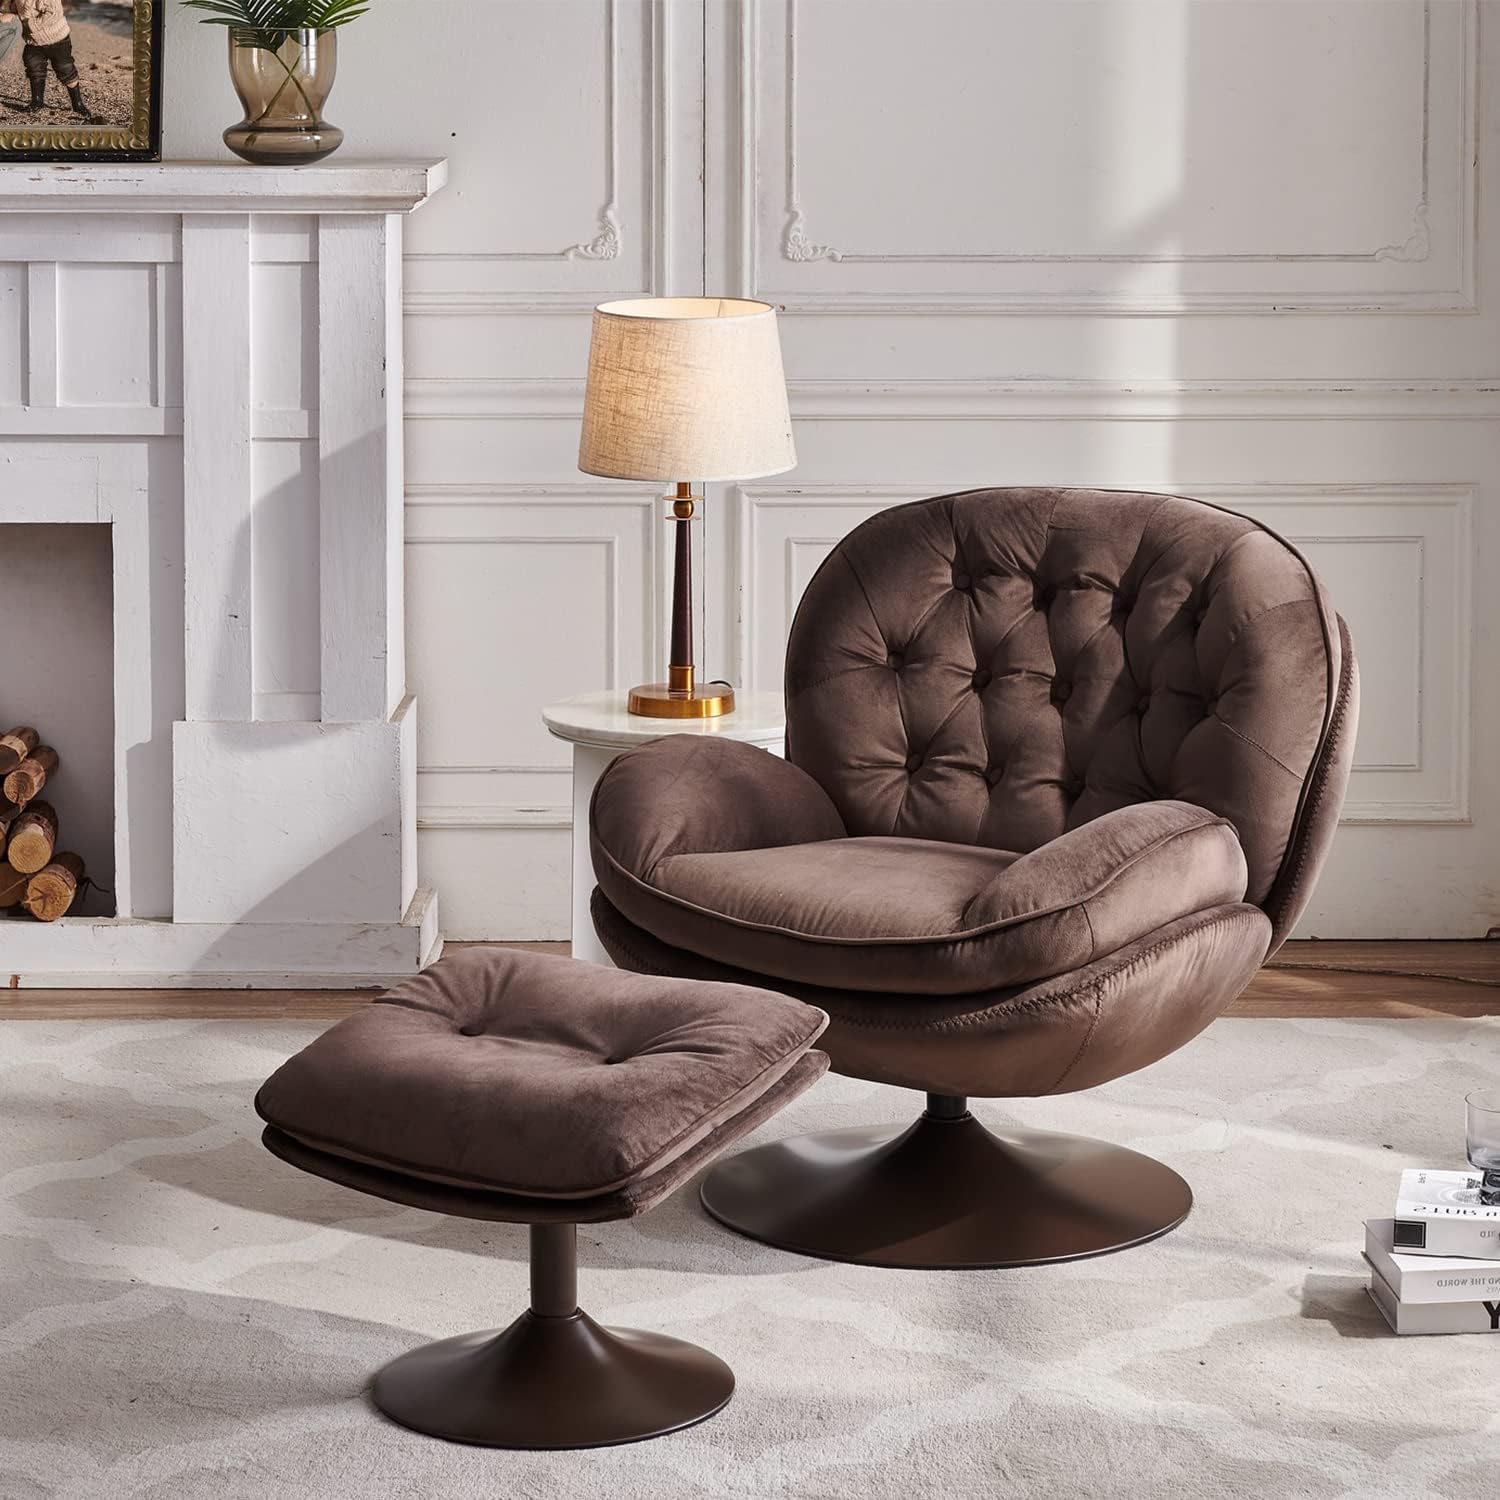 Madi Velvet Swivel Accent Chair With Ottoman, 12 colors